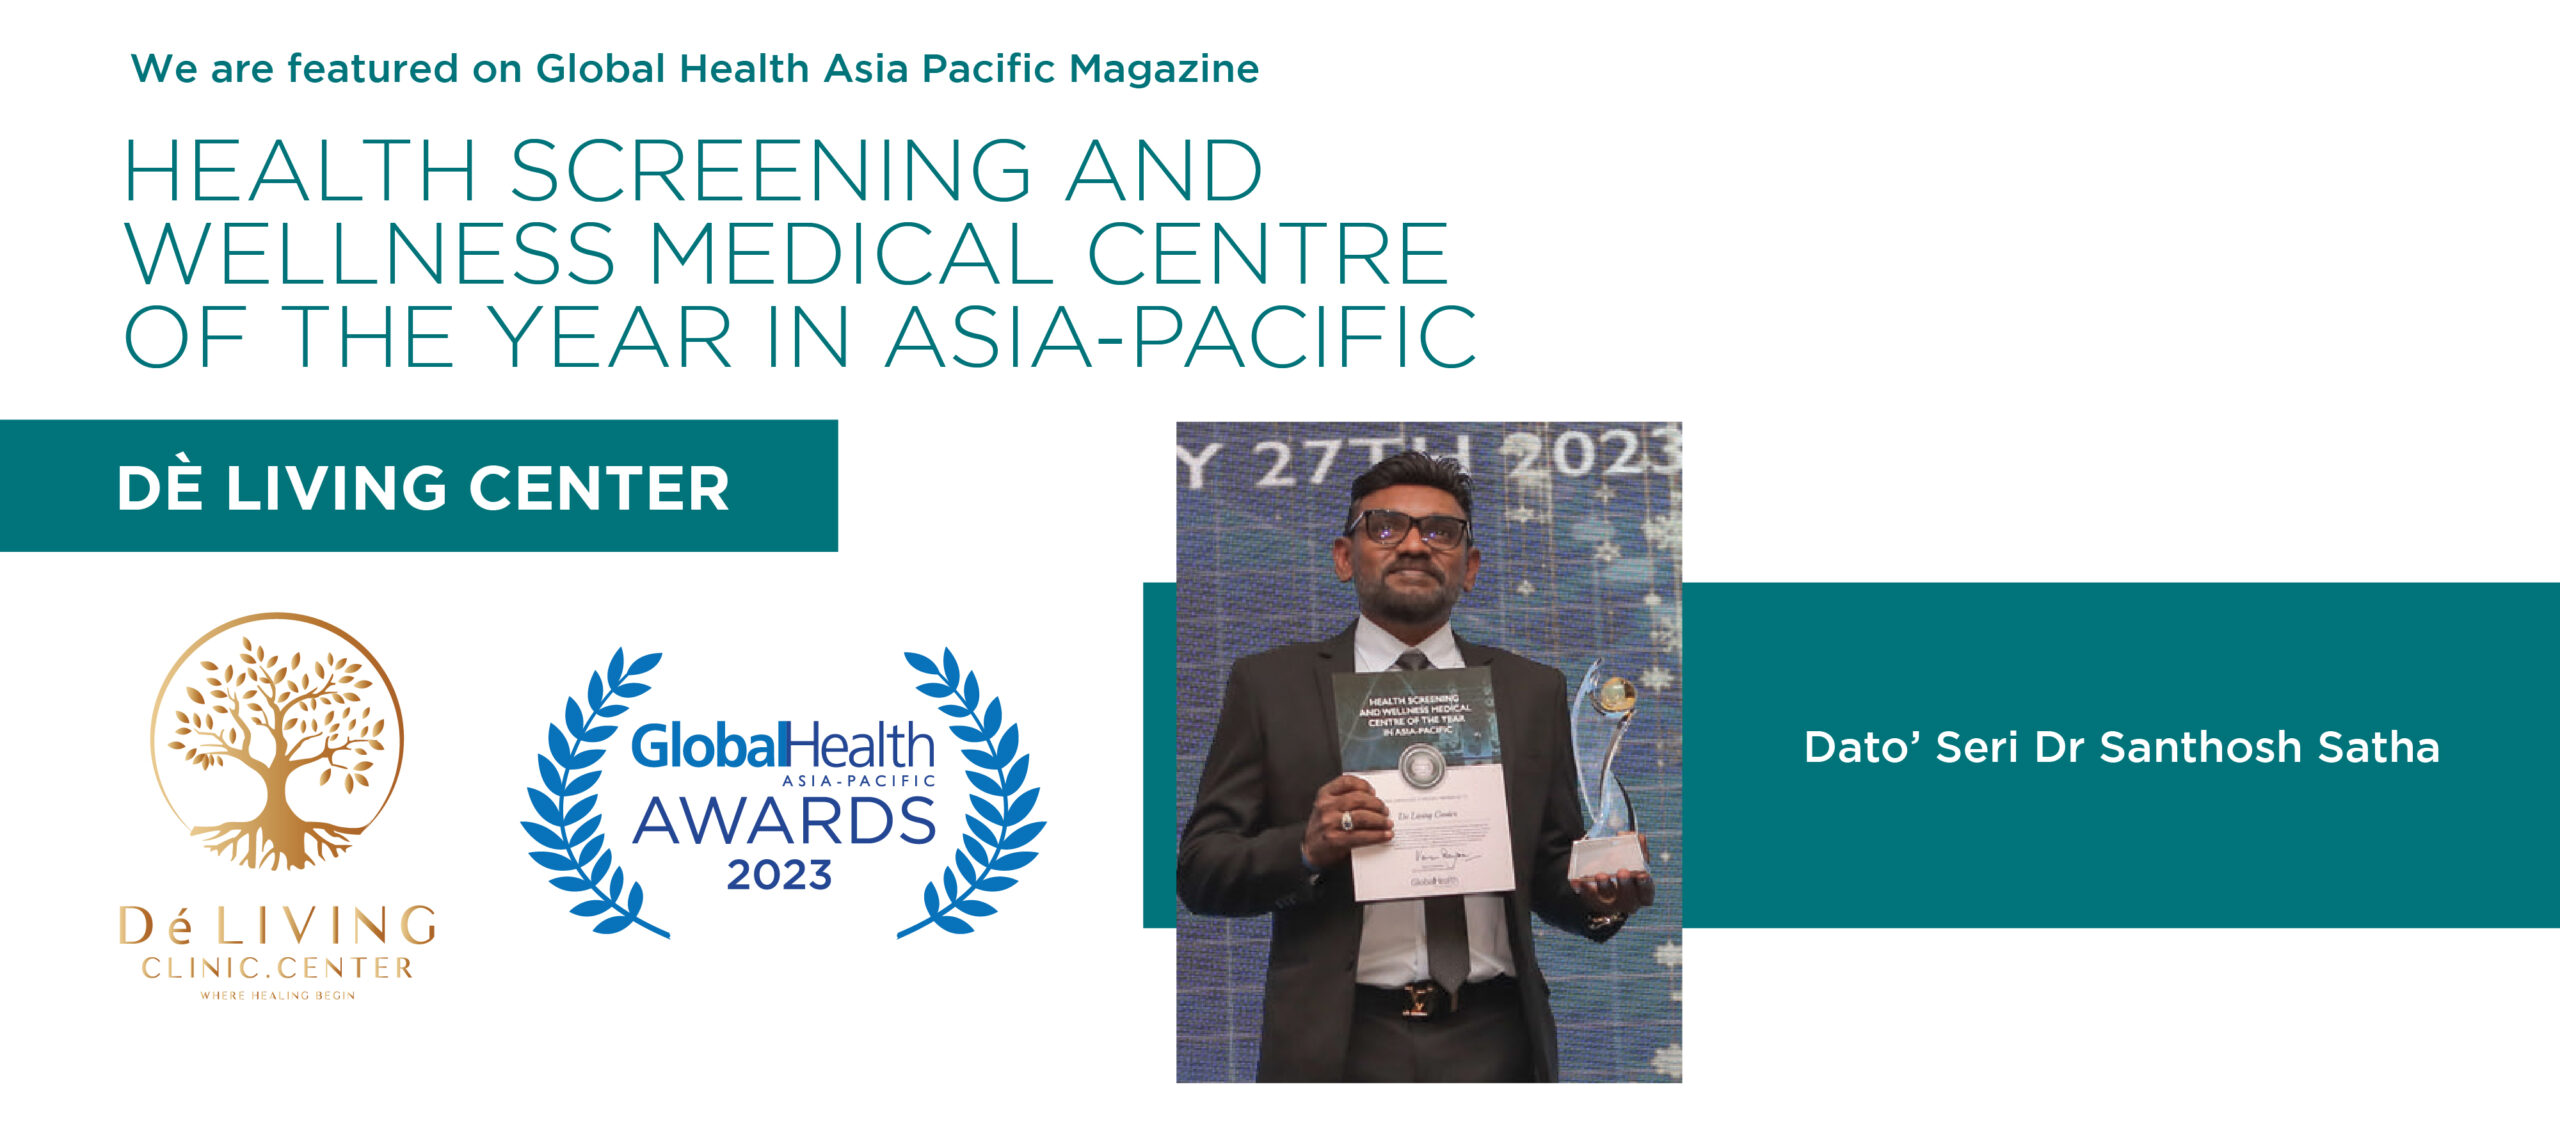 To showcase the feature of Global Health Asia Pacific Magazine